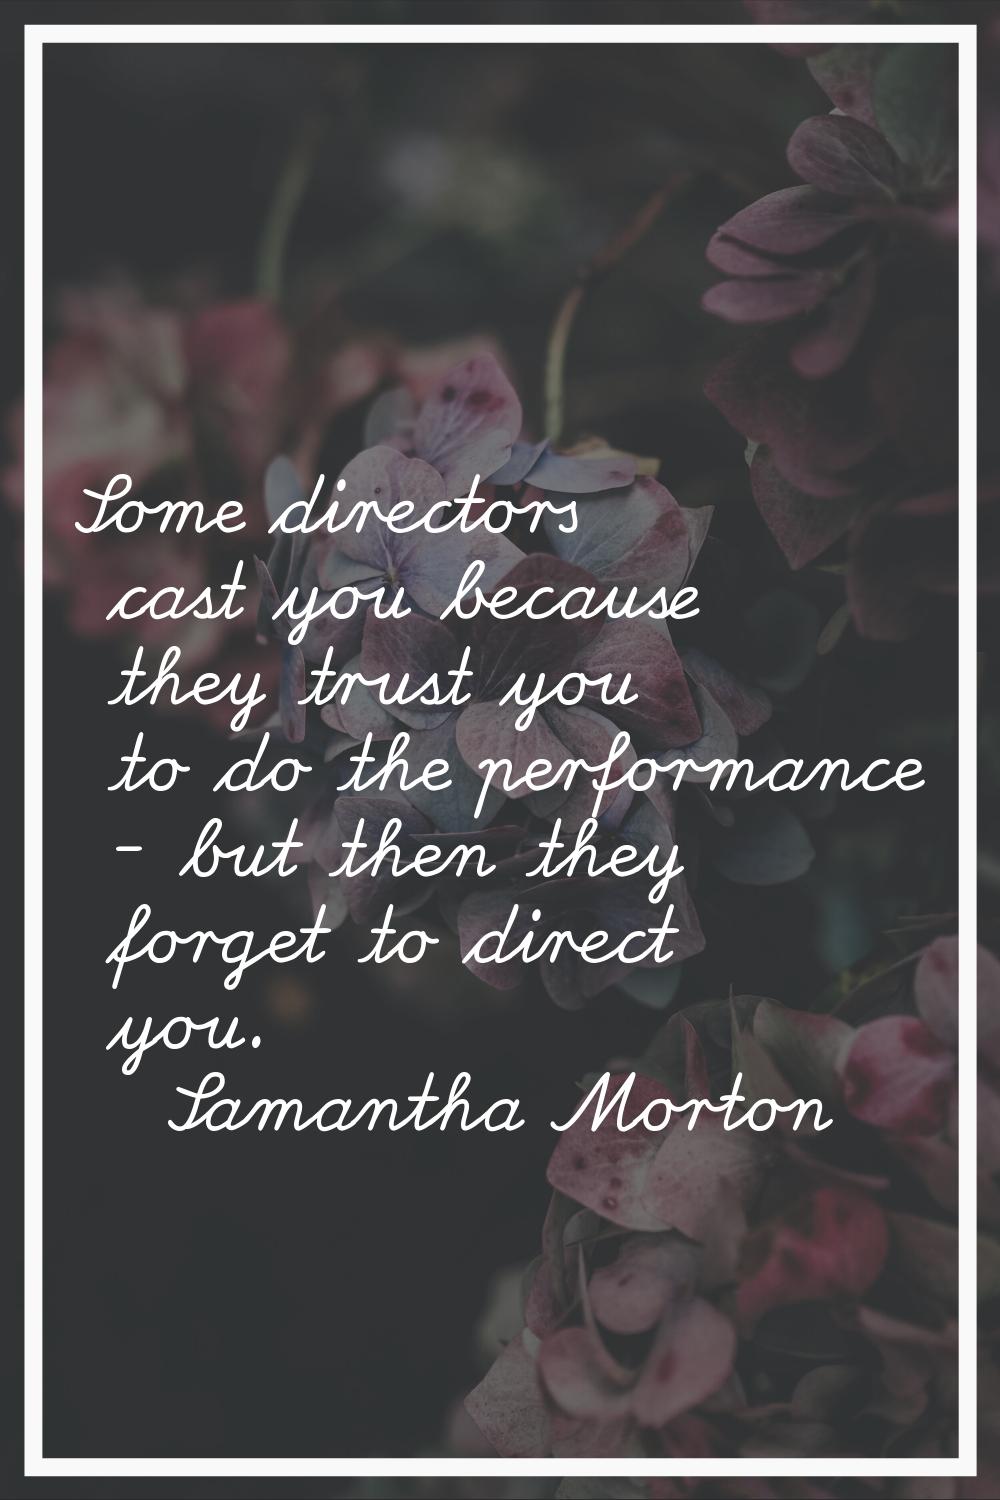 Some directors cast you because they trust you to do the performance - but then they forget to dire